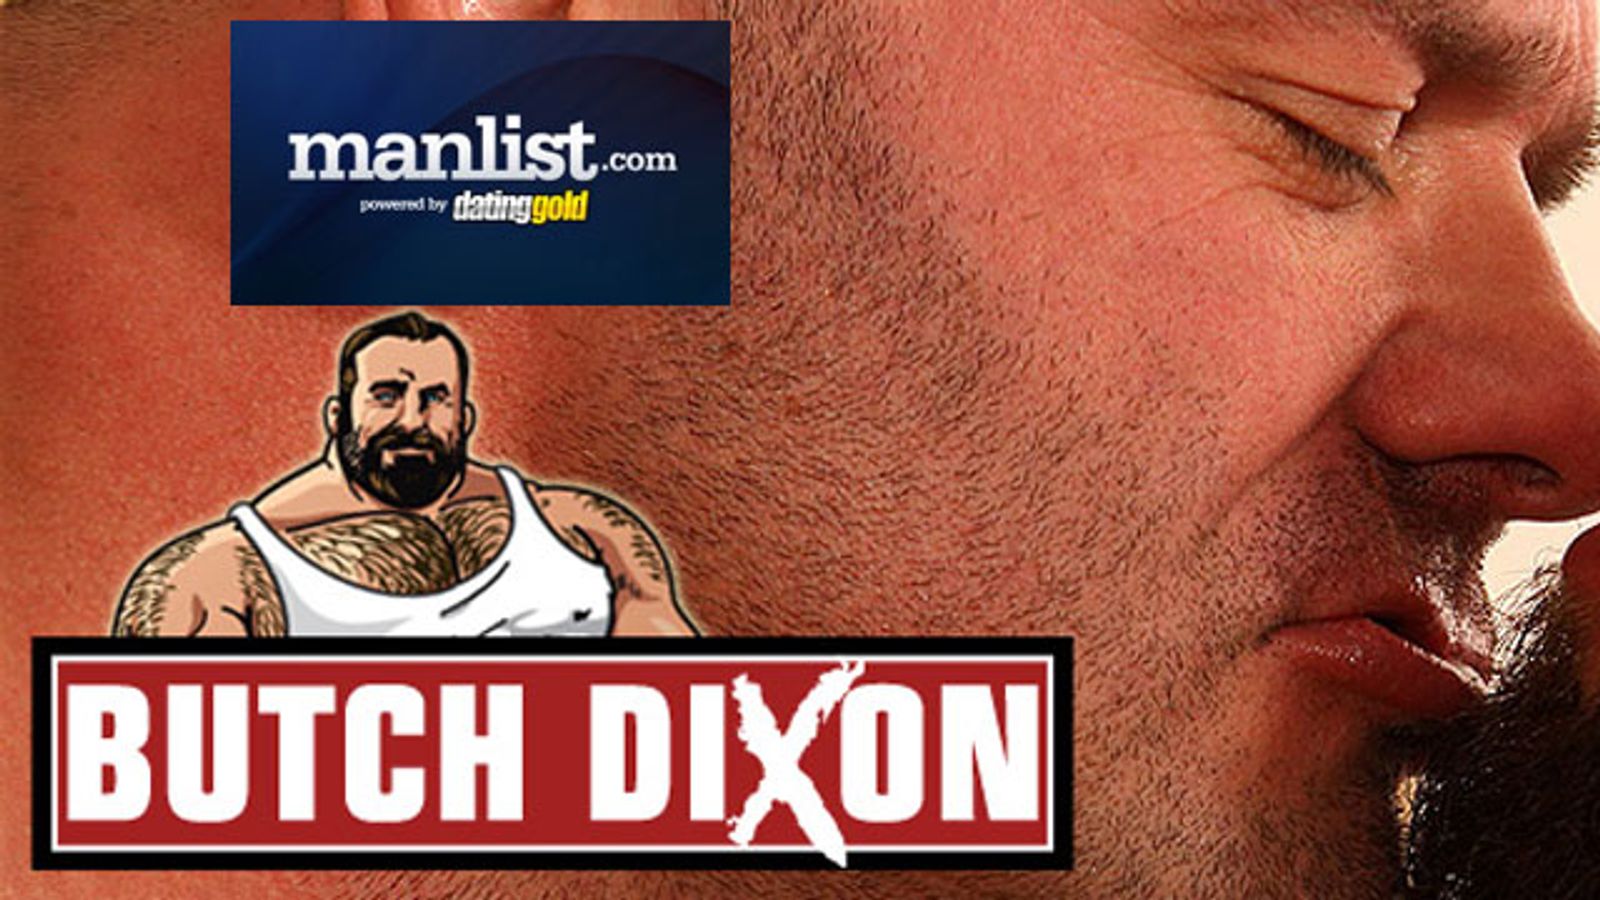 ManList Partners with Butch Dixon on New Marketing Campaign